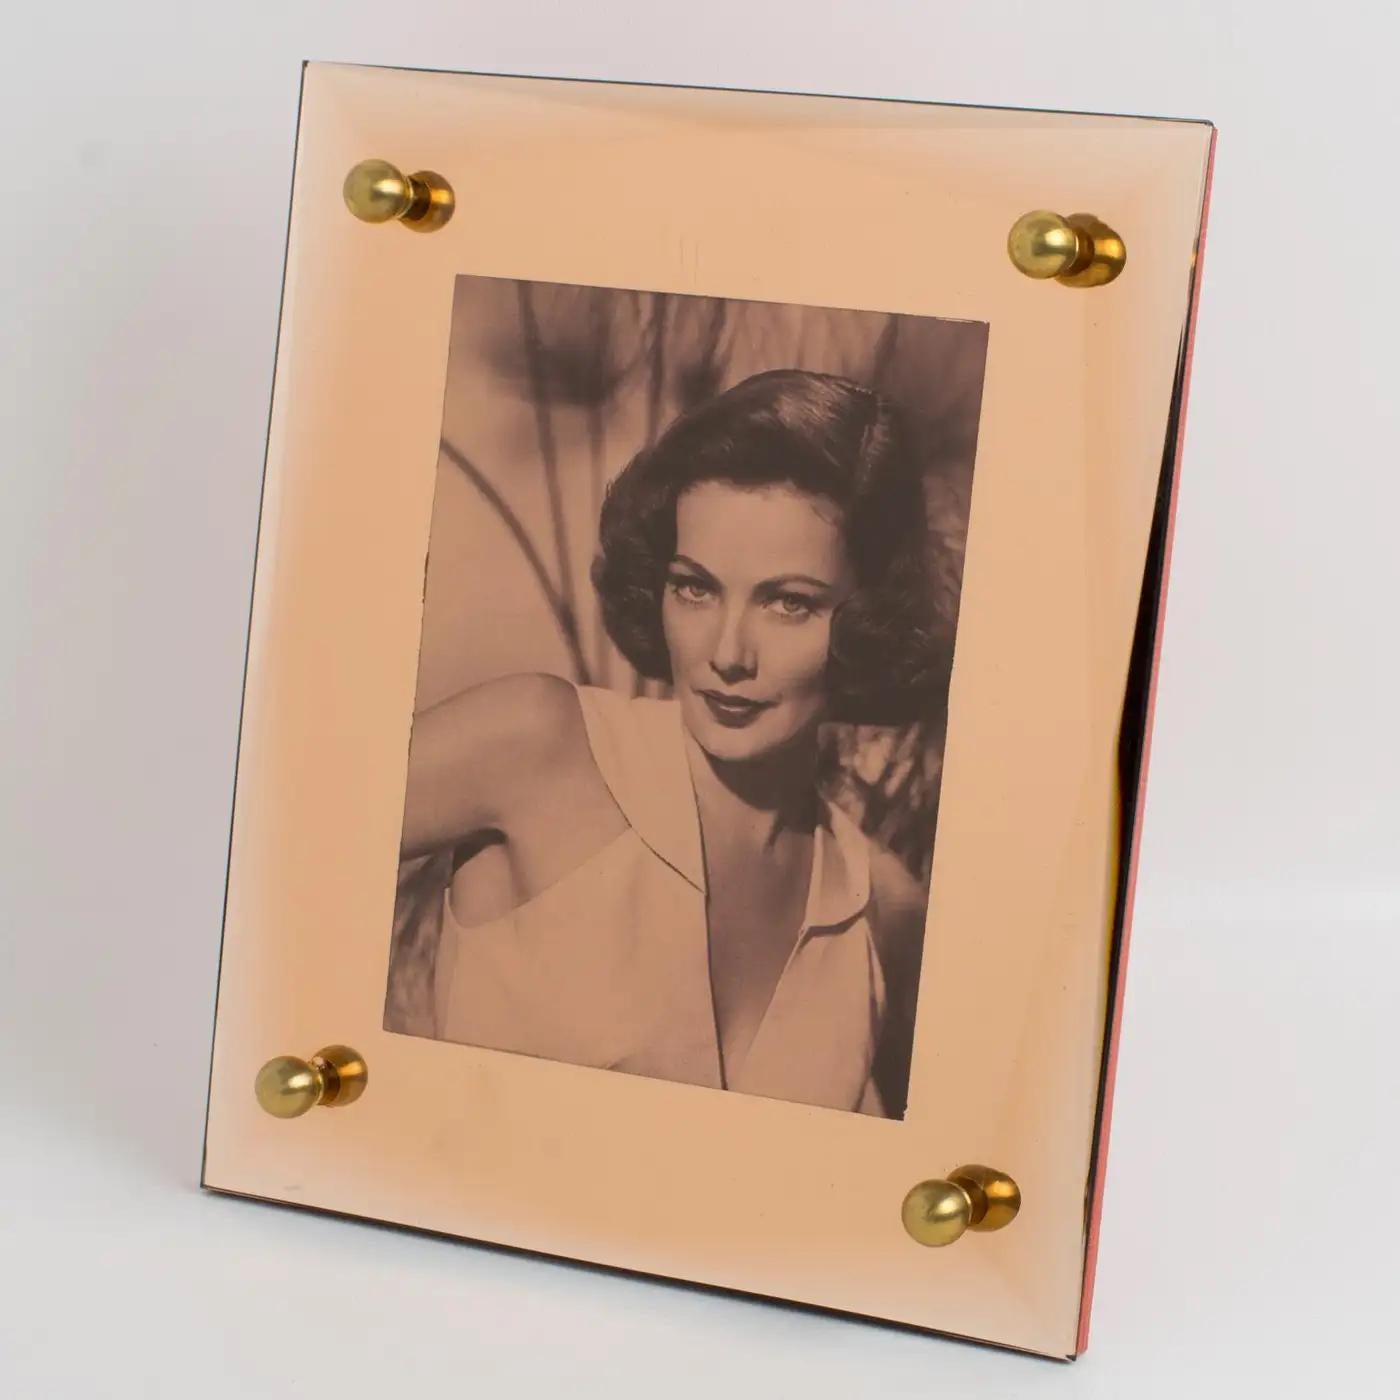 This lovely mirrored glass picture photo frame was produced in France in the 1940s. The mirror has a deep geometric bevelling, and a rare copper or pink-peach color, complimented with gilded brass bead cabochons. The frame can be placed only in a